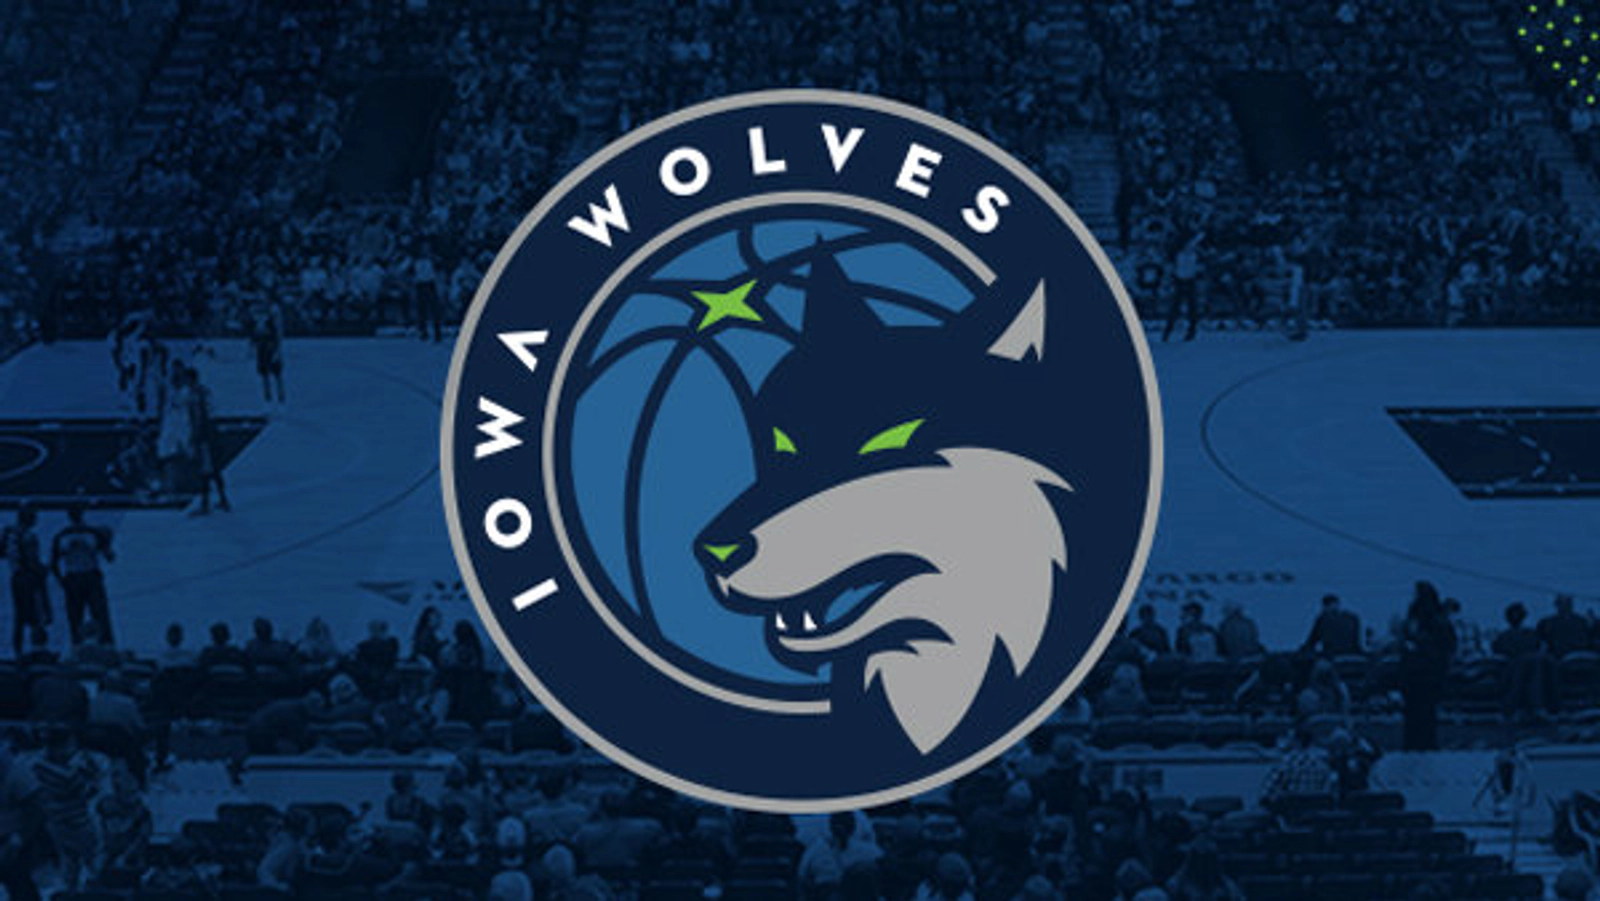  Sit Courtside at the Iowa Wolves with the Seantourage!  - Thumbnail Image